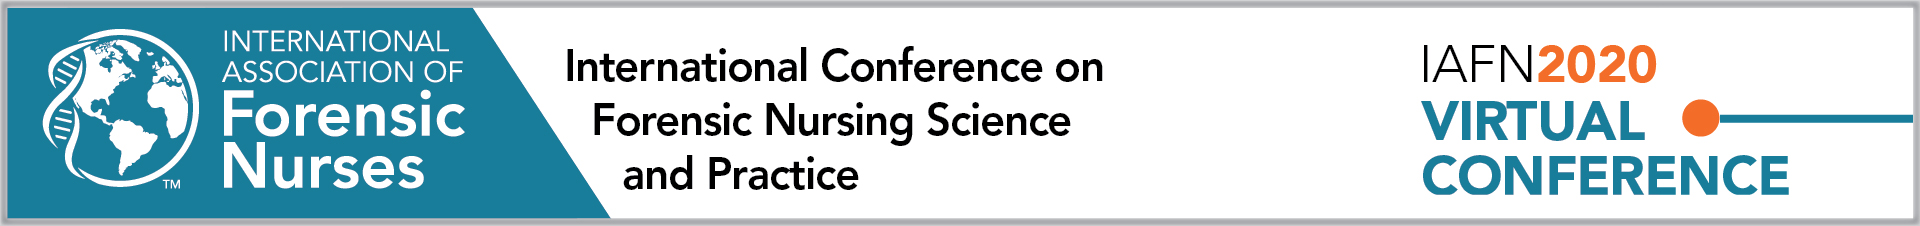 2020 International Conference on Forensic Nursing Science and Practice Event Banner